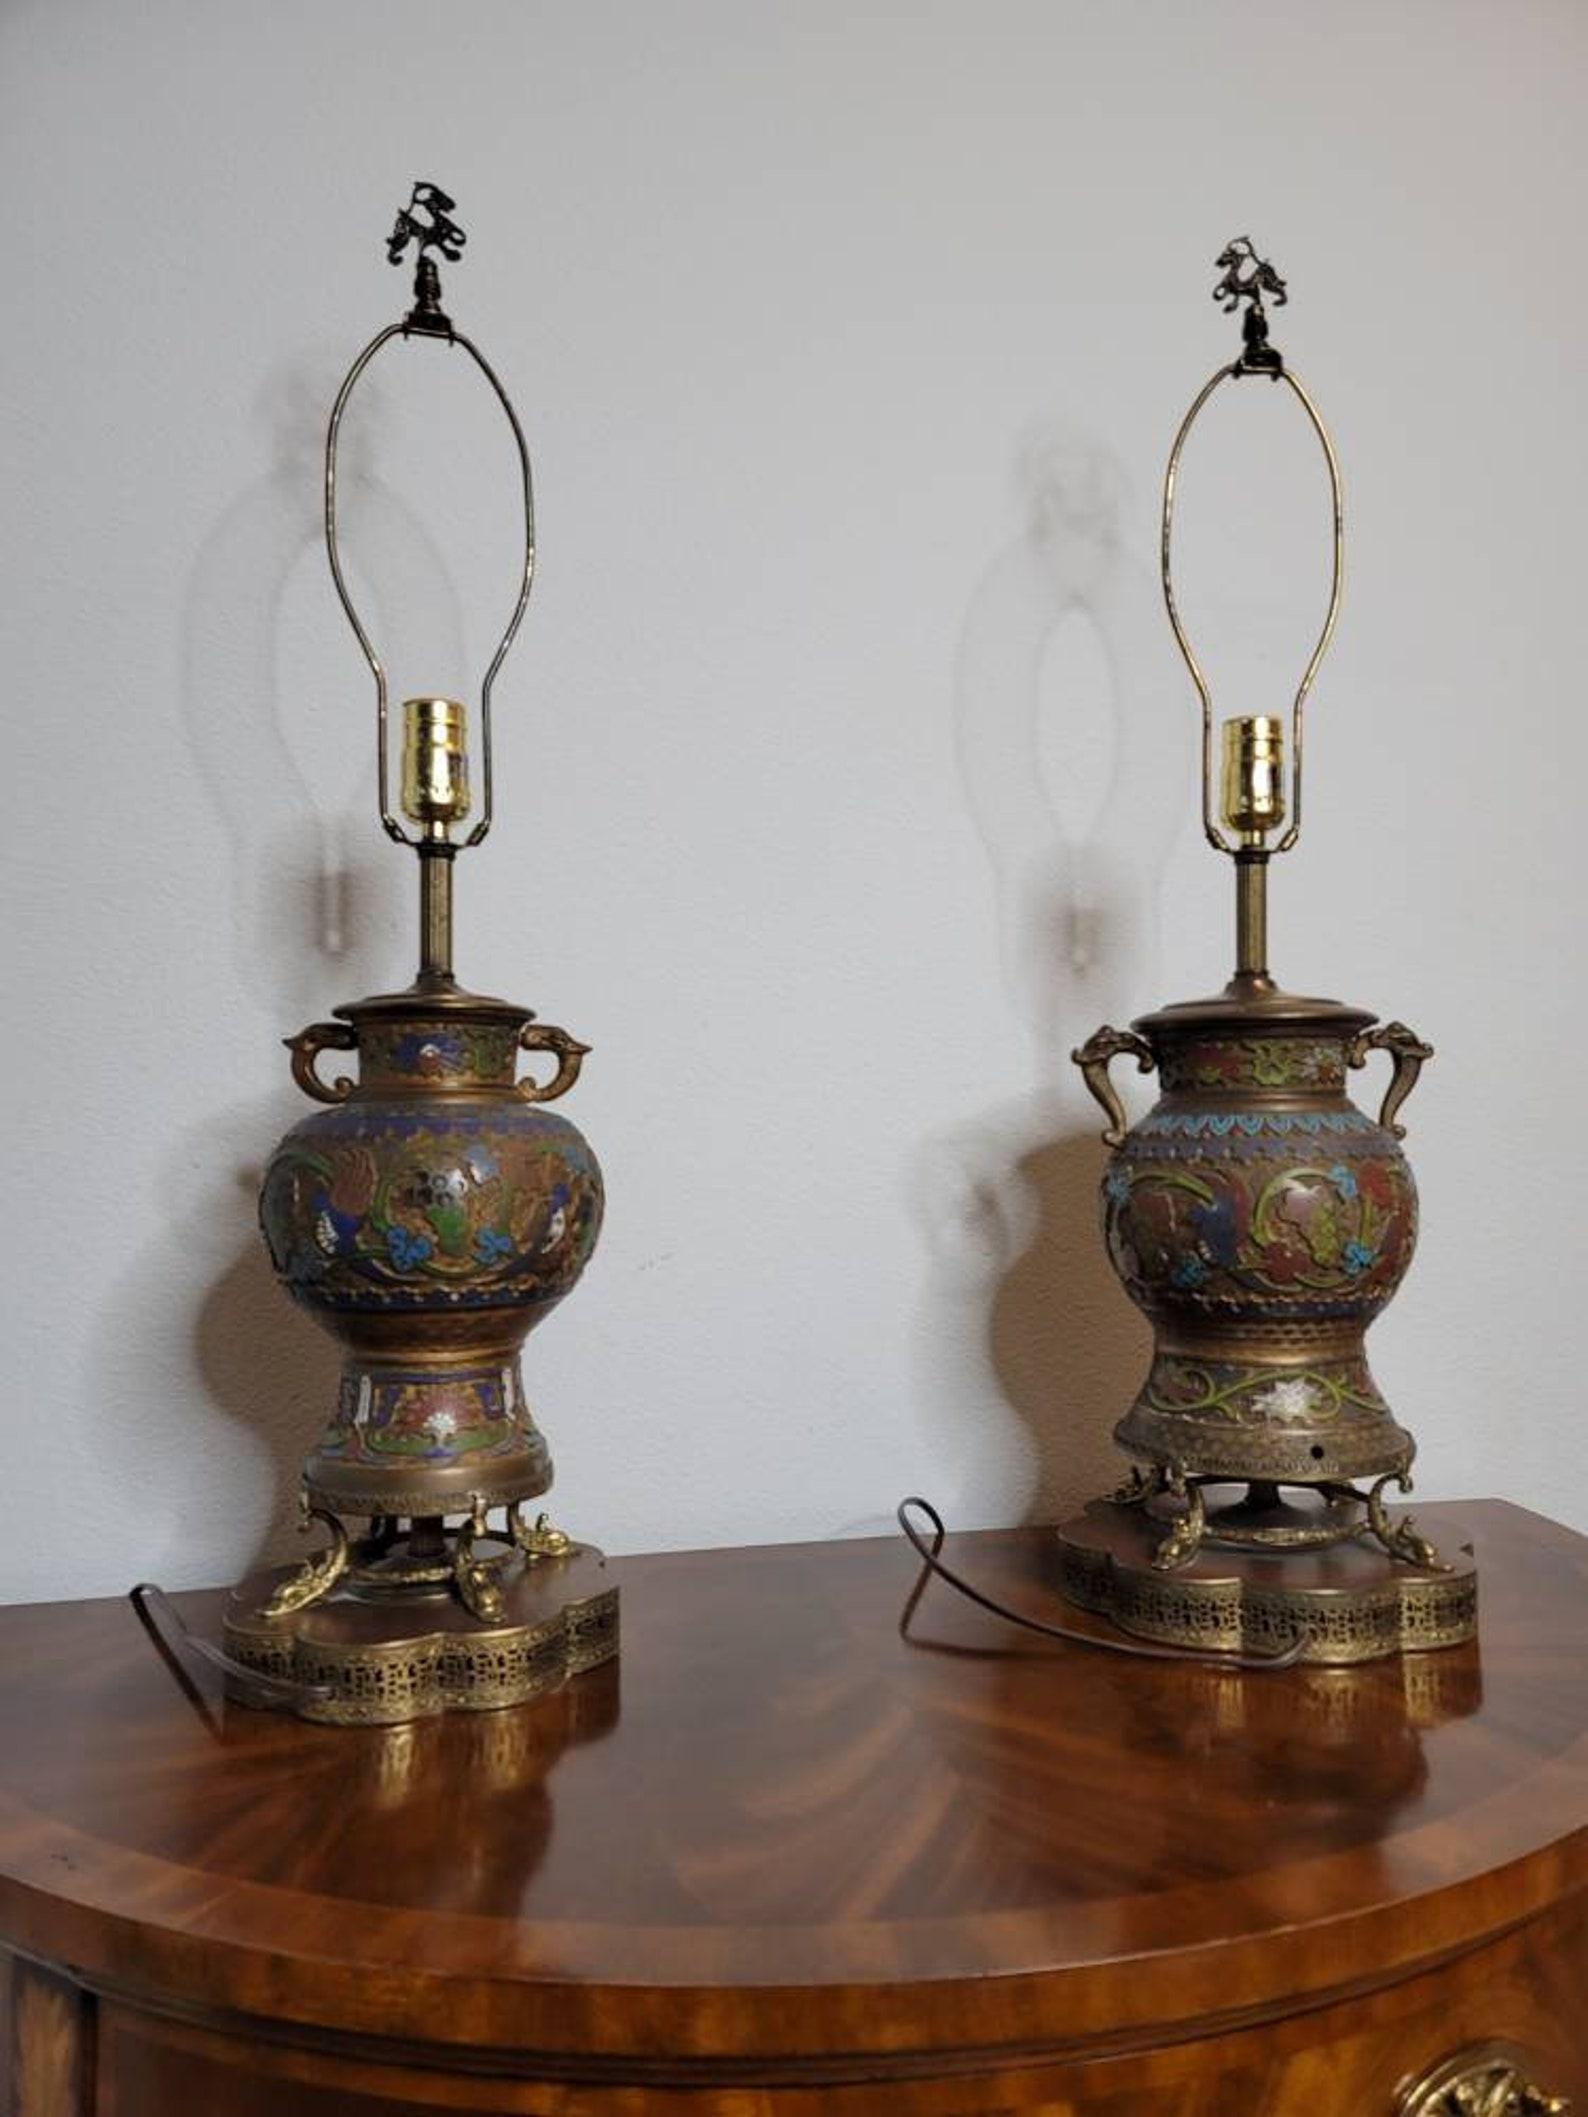 Pair of Antique Asian Champleve’ Enameled Bronze Urns Fashioned As Table Lamps In Good Condition For Sale In Forney, TX